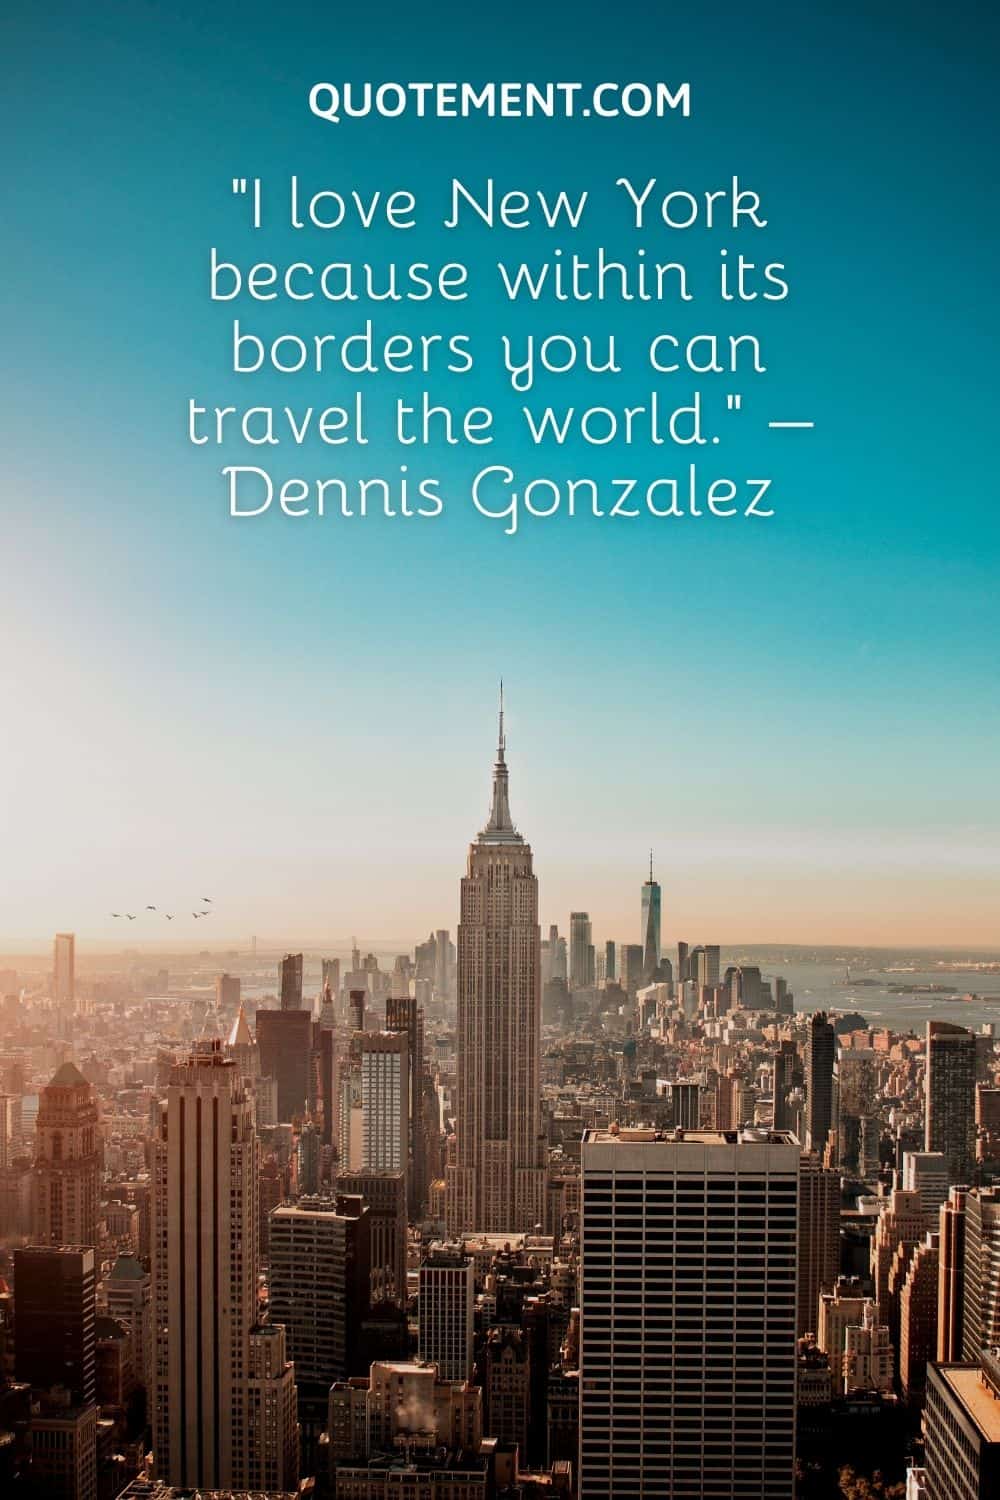 I love New York because within its borders you can travel the world